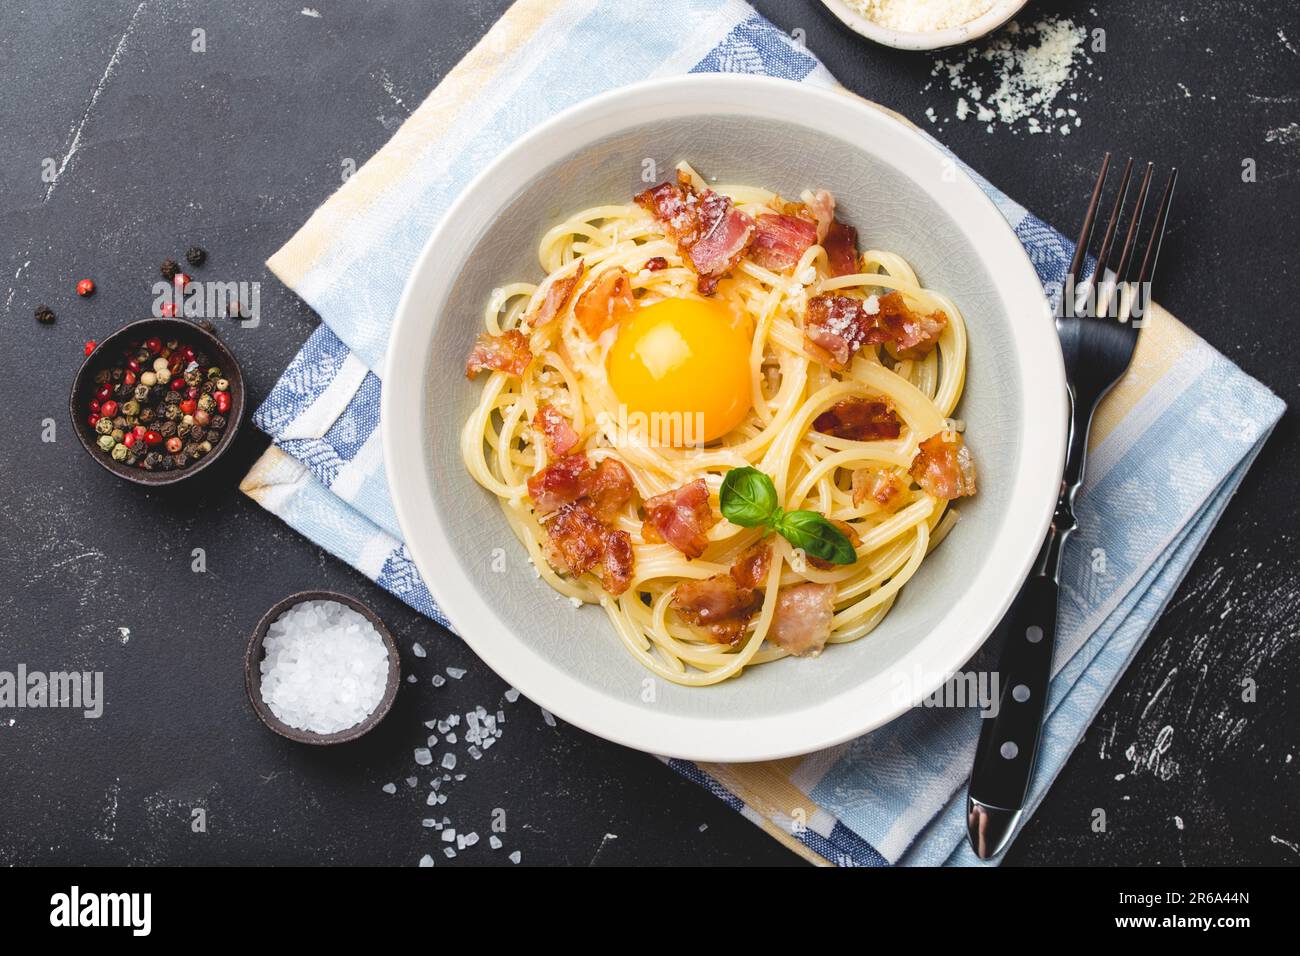 Traditional Italian pasta dish, spaghetti carbonara with yolk, parmesan cheese, bacon in plate on black rustic stone background, top view. Italian Stock Photo